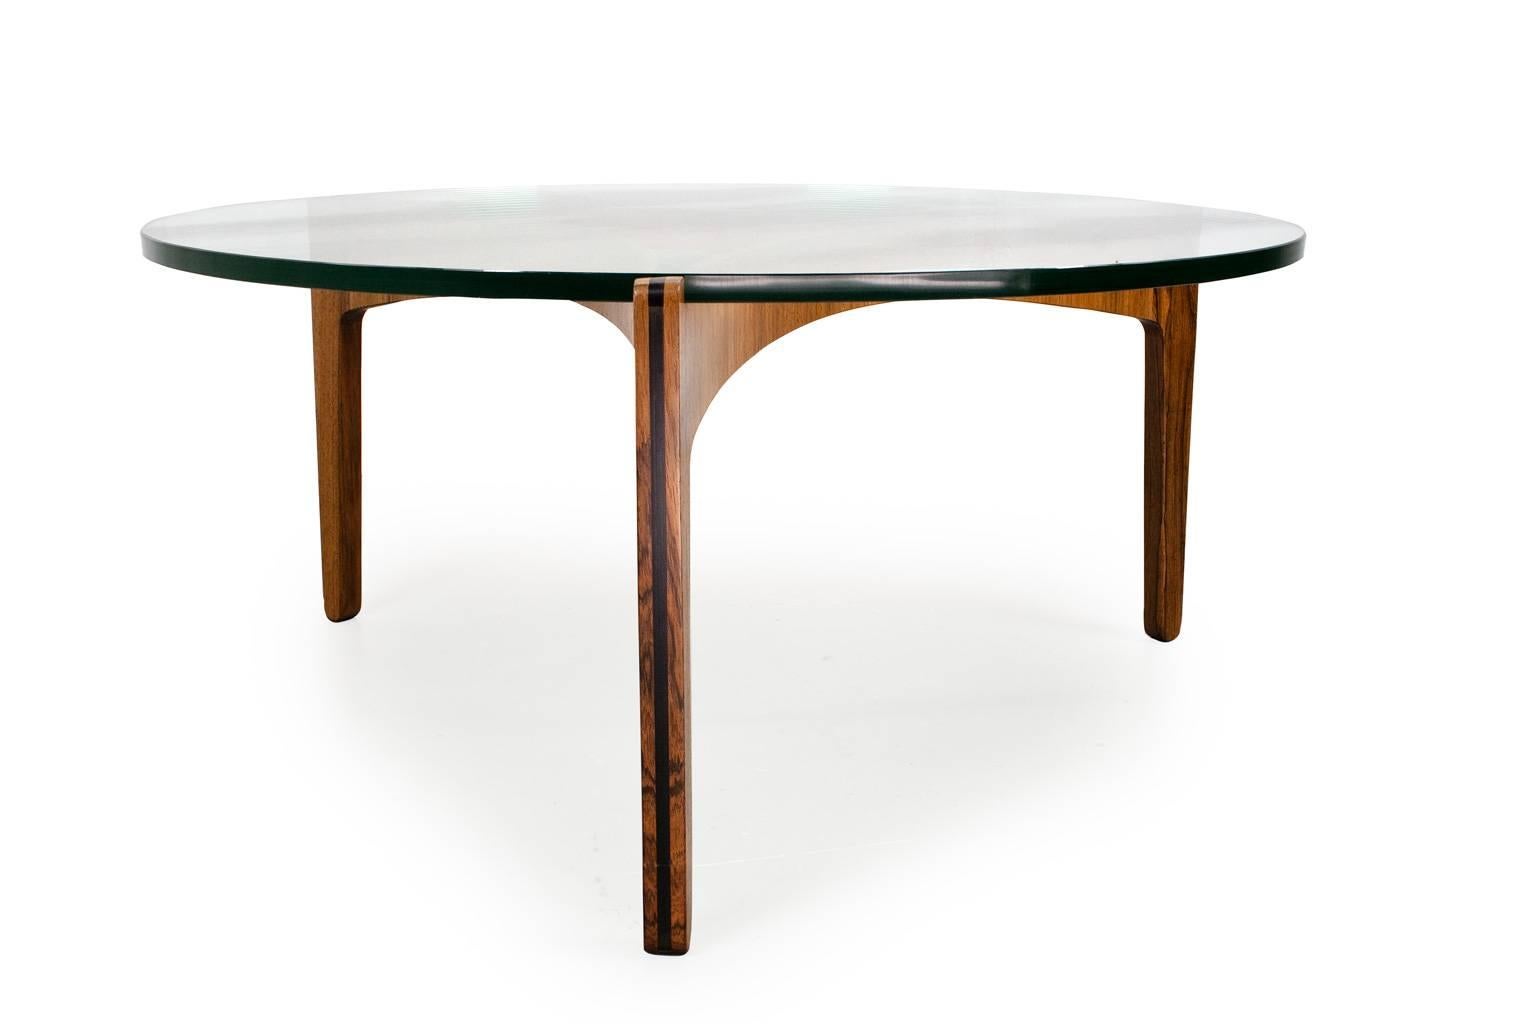 Scandinavian Modern glass and rosewood coffee table by Sven Ellekaer, 1961 produced by Christian Linneberg. In excellent condition Mid-Century Modern design. The elegant bent rosewood shows the craftsmanship of the Nordic designer and places him